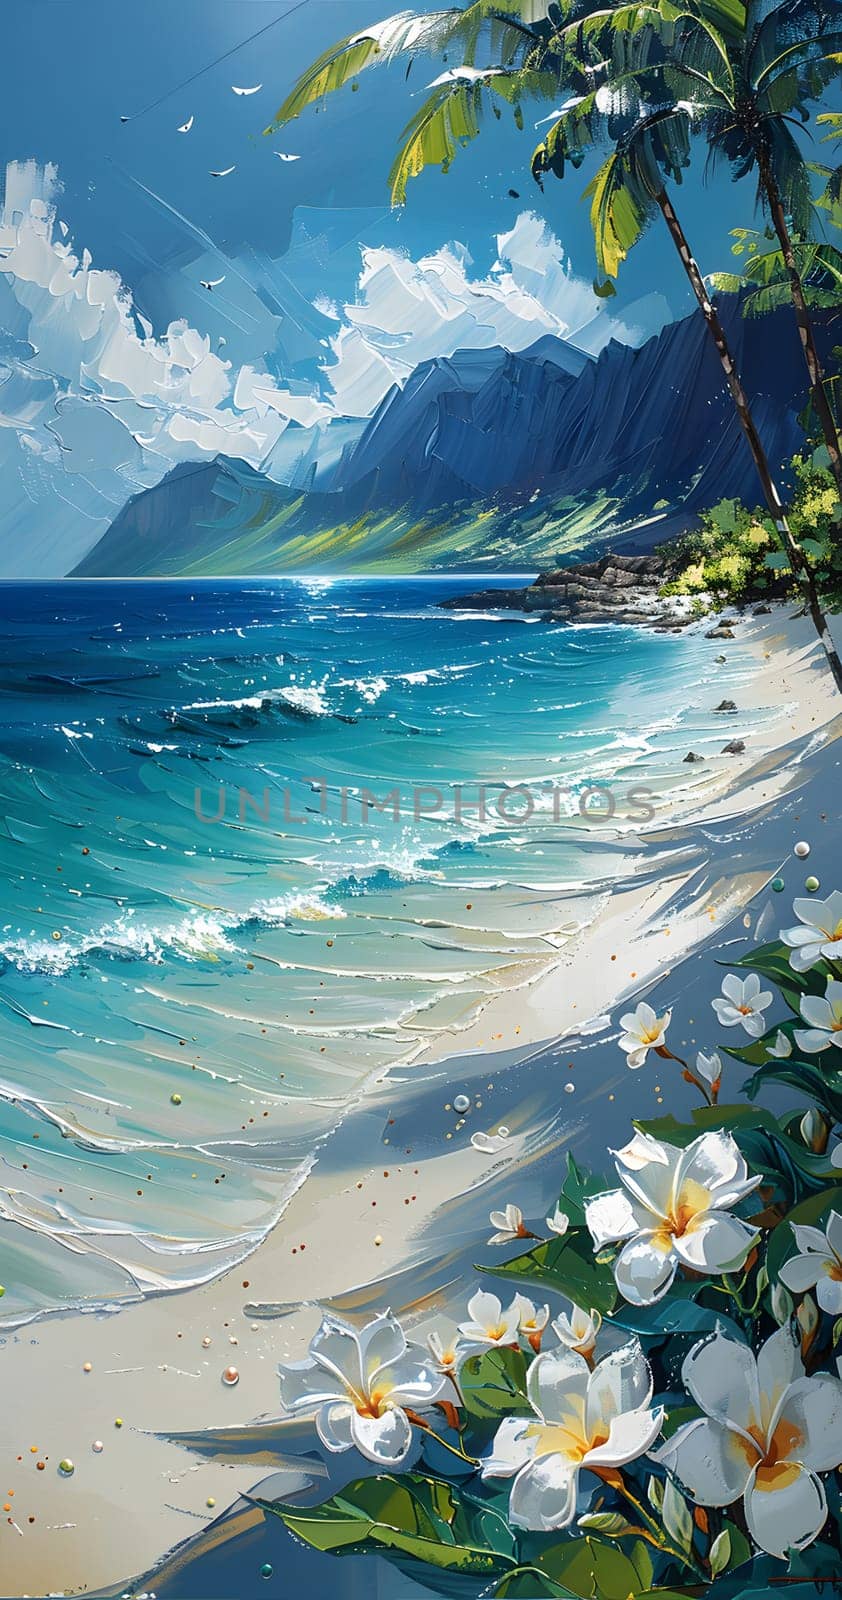 A natural landscape painting of a coastal beach with azure sky, fluffy clouds, crystal clear aqua water, palm trees, and colorful flowers